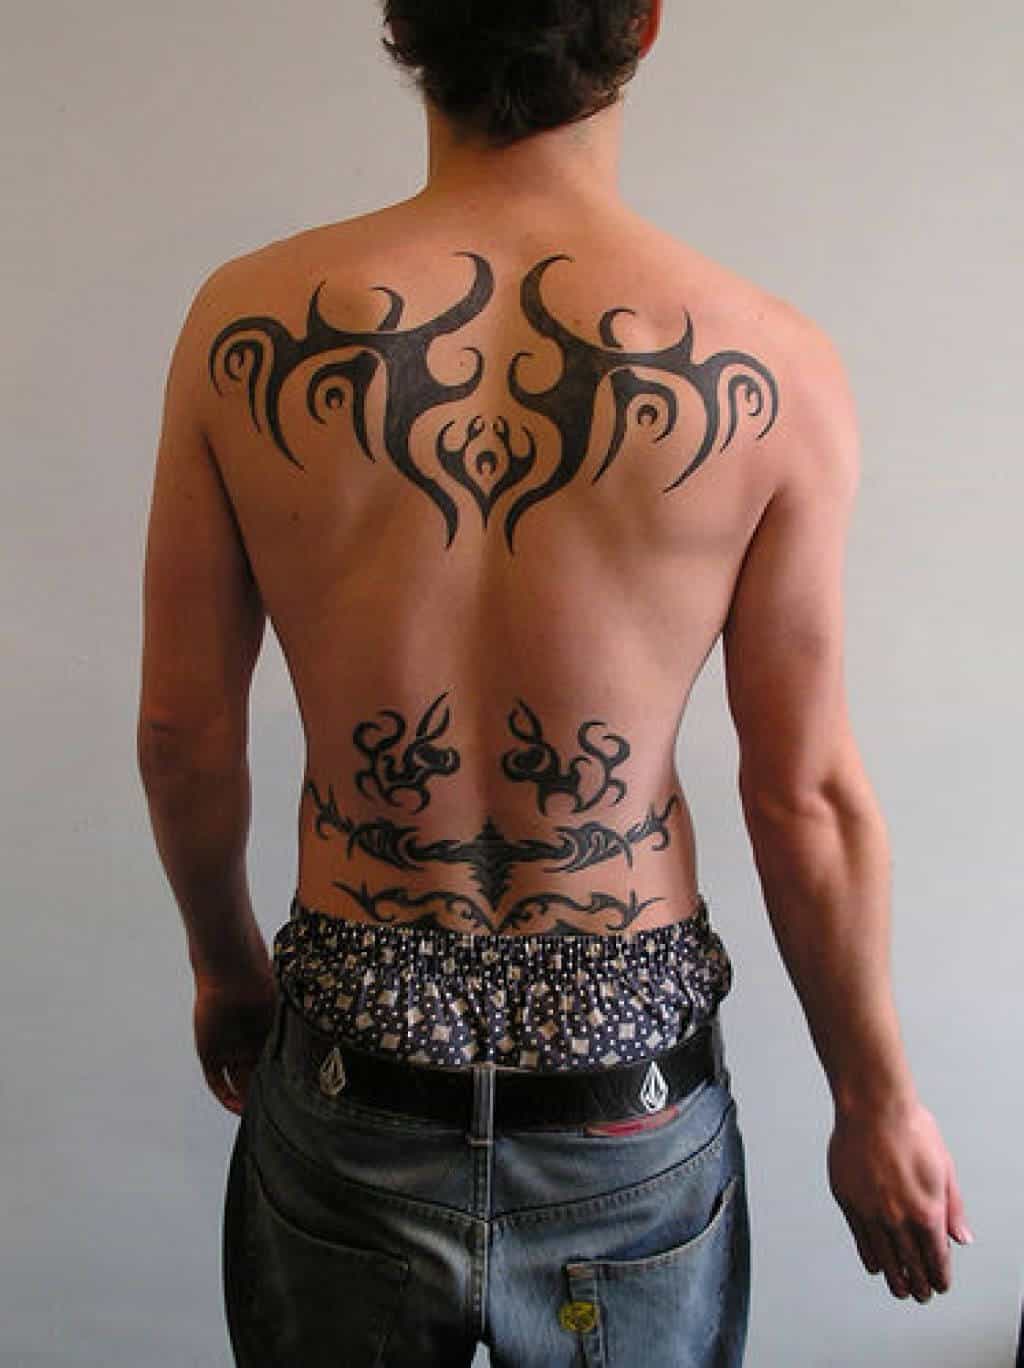 Lower Back Tattoos for Men - Ideas and Designs for Guys